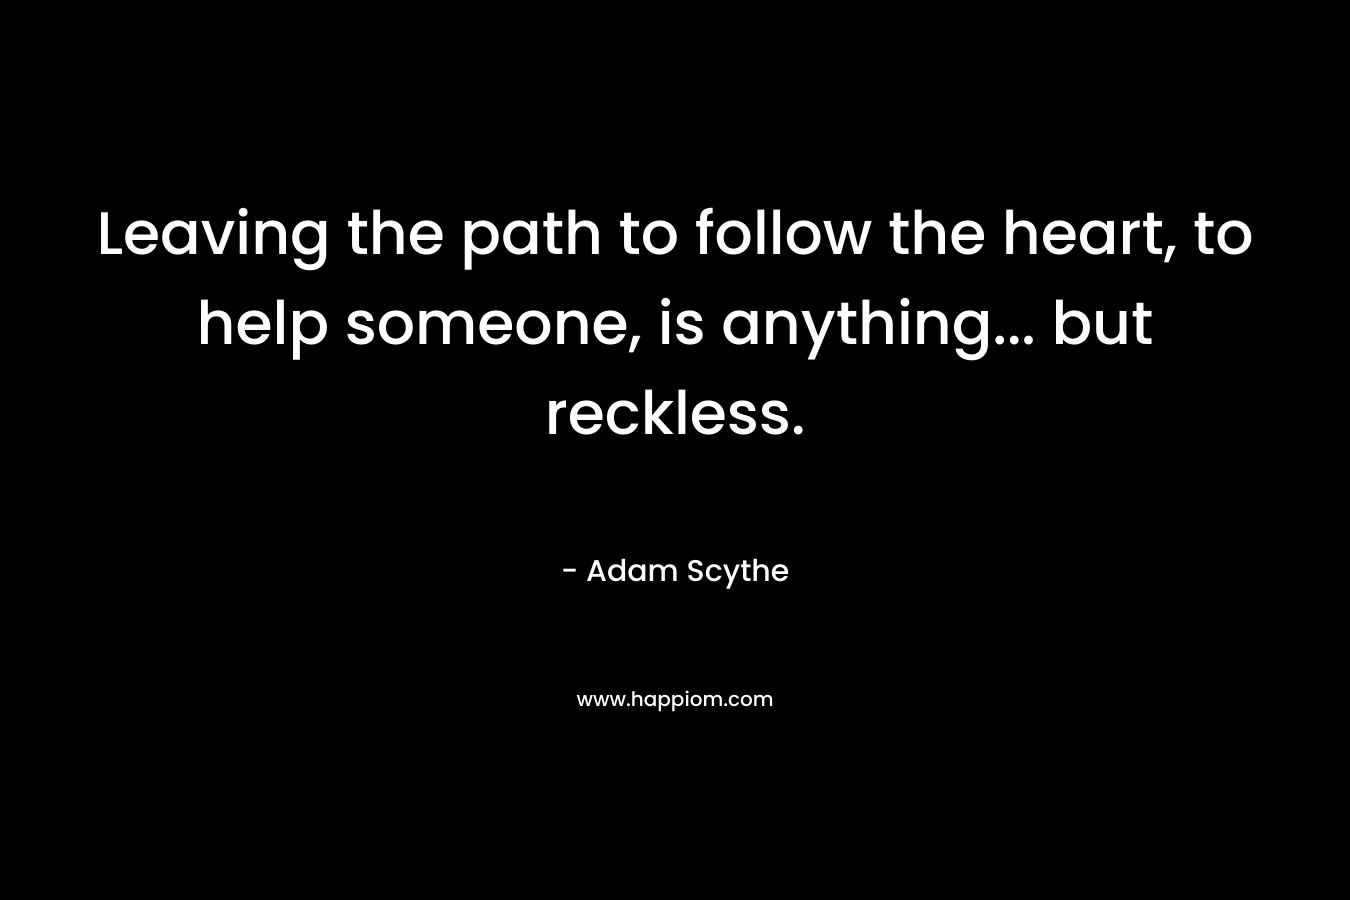 Leaving the path to follow the heart, to help someone, is anything… but reckless. – Adam Scythe